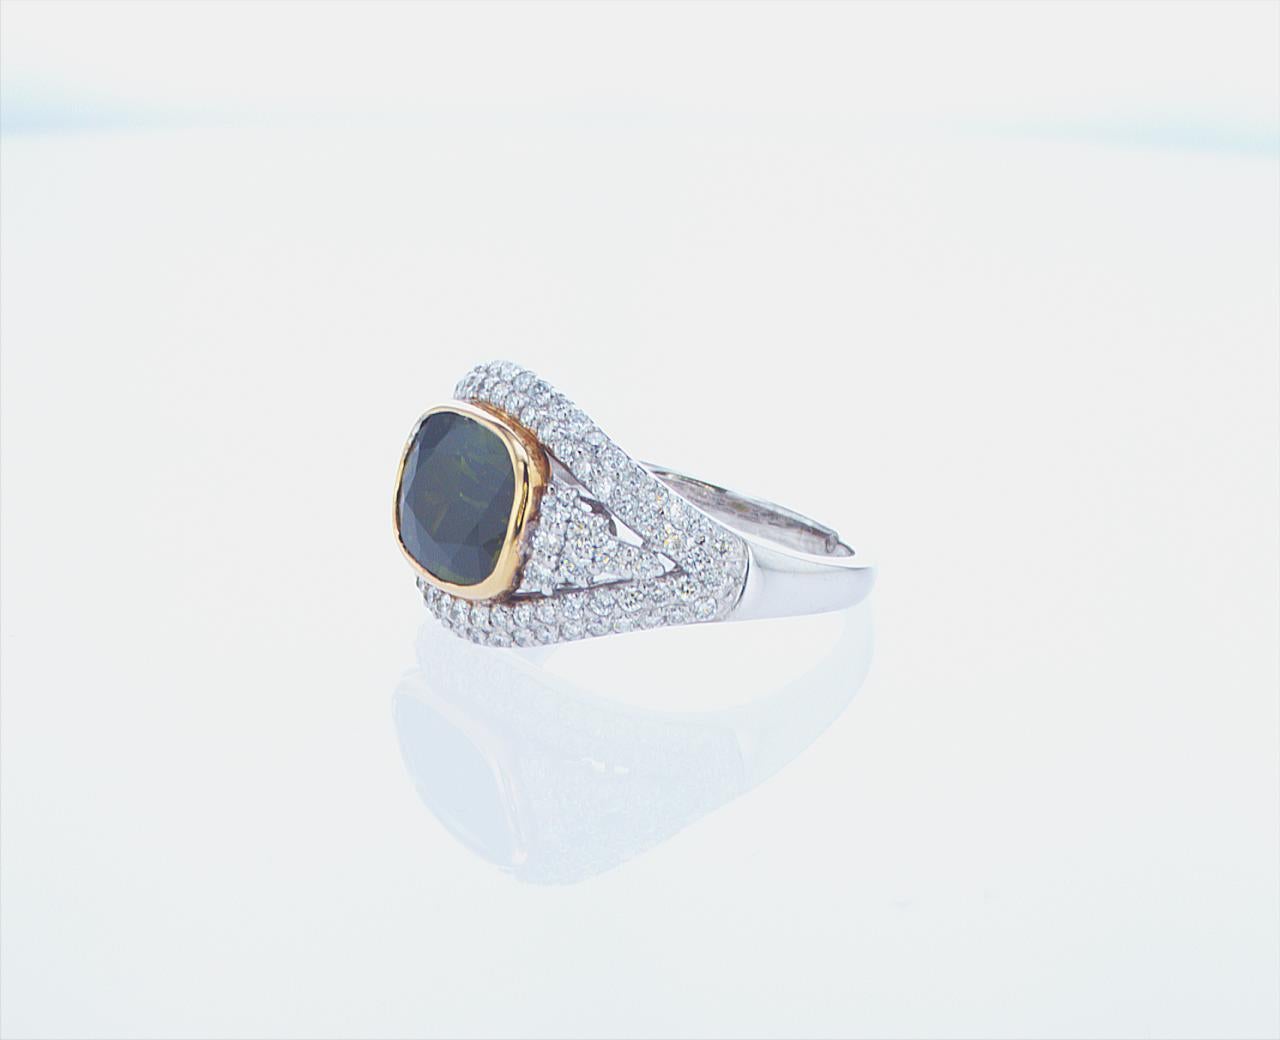 Oval Cut 3.40ct Green Sapphire Ring with 0.84ct TW Dias in 18k White Gold with Palladium. For Sale